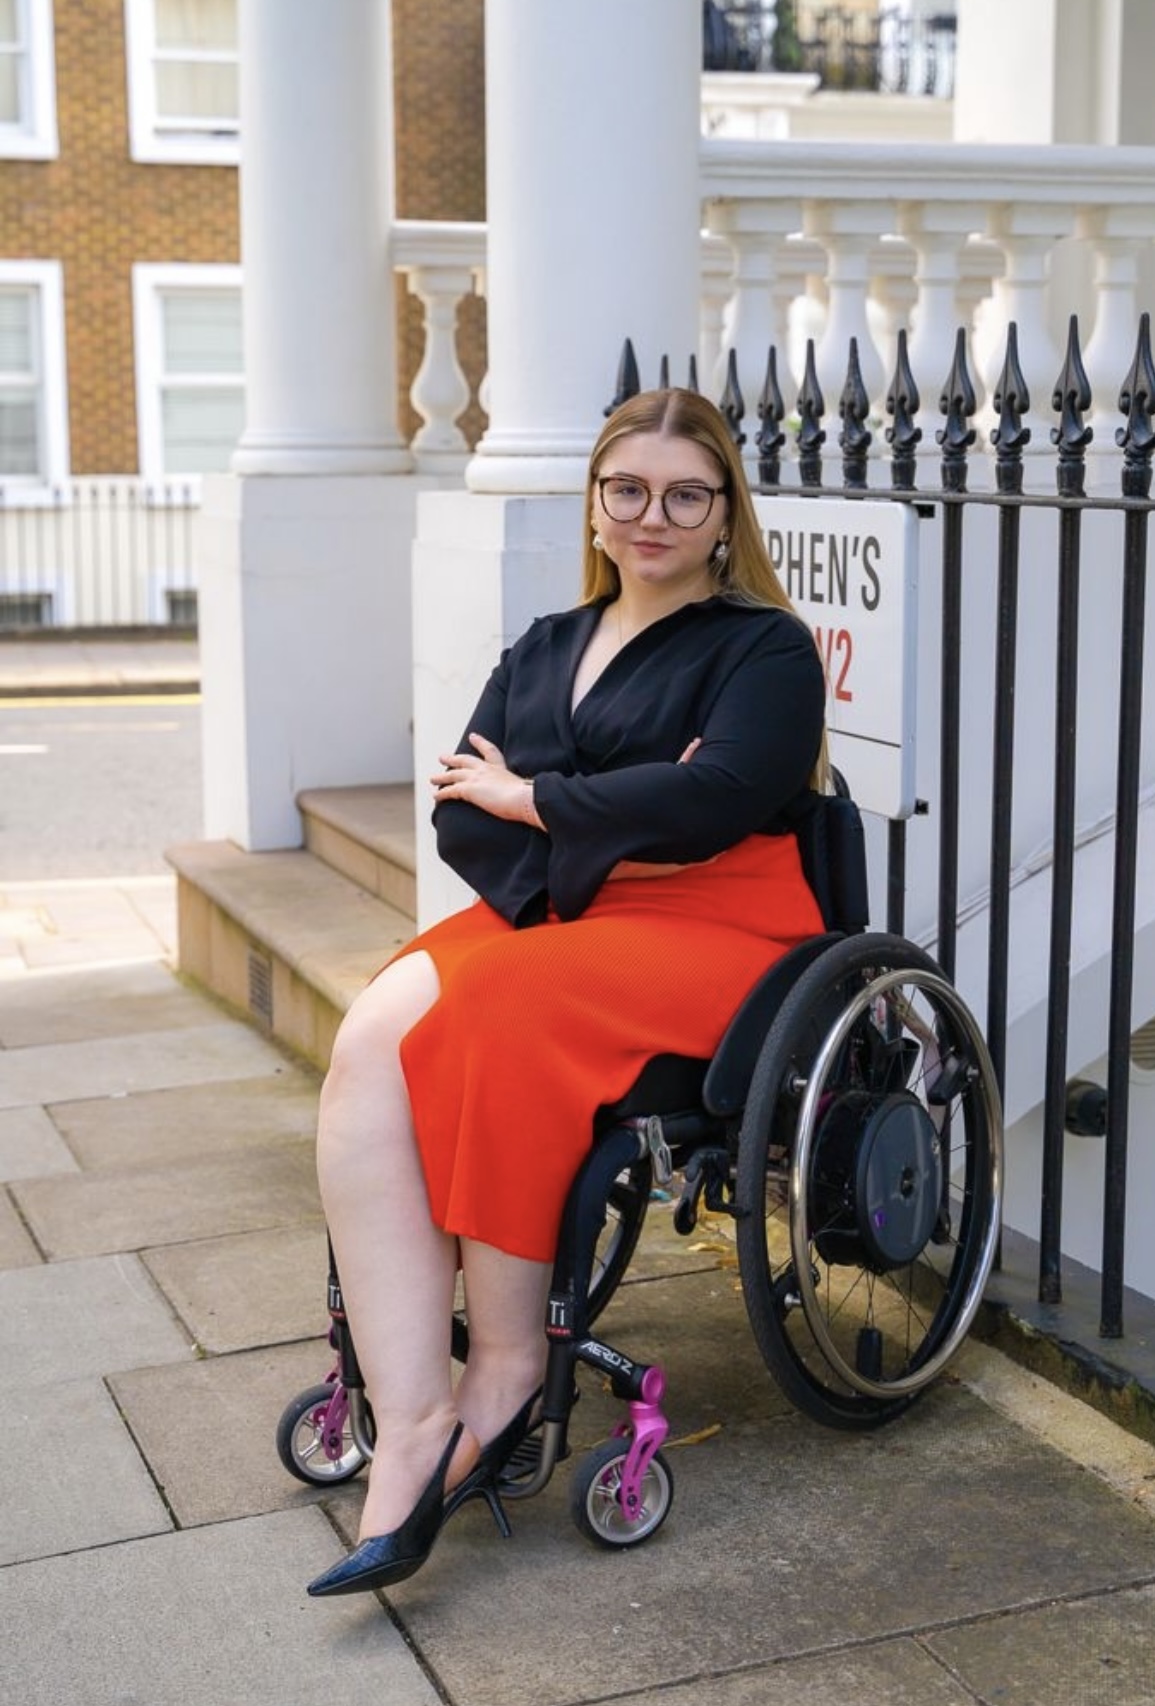 Charley is a 26 year old white woman. She is sitting in her tilite wheelchair, with emotion wheels, and the image is a full body image, she has her arms crossed and is staring at the camera. She has blonde highlighted hair, and brown eyes. She is wearing large framed glasses, and is wearing a black v neck shirt, with a red pencil skirt, with a split. Charley is also wearing black sling back heels. The background of the image shows black iron bars, and a london street sign.